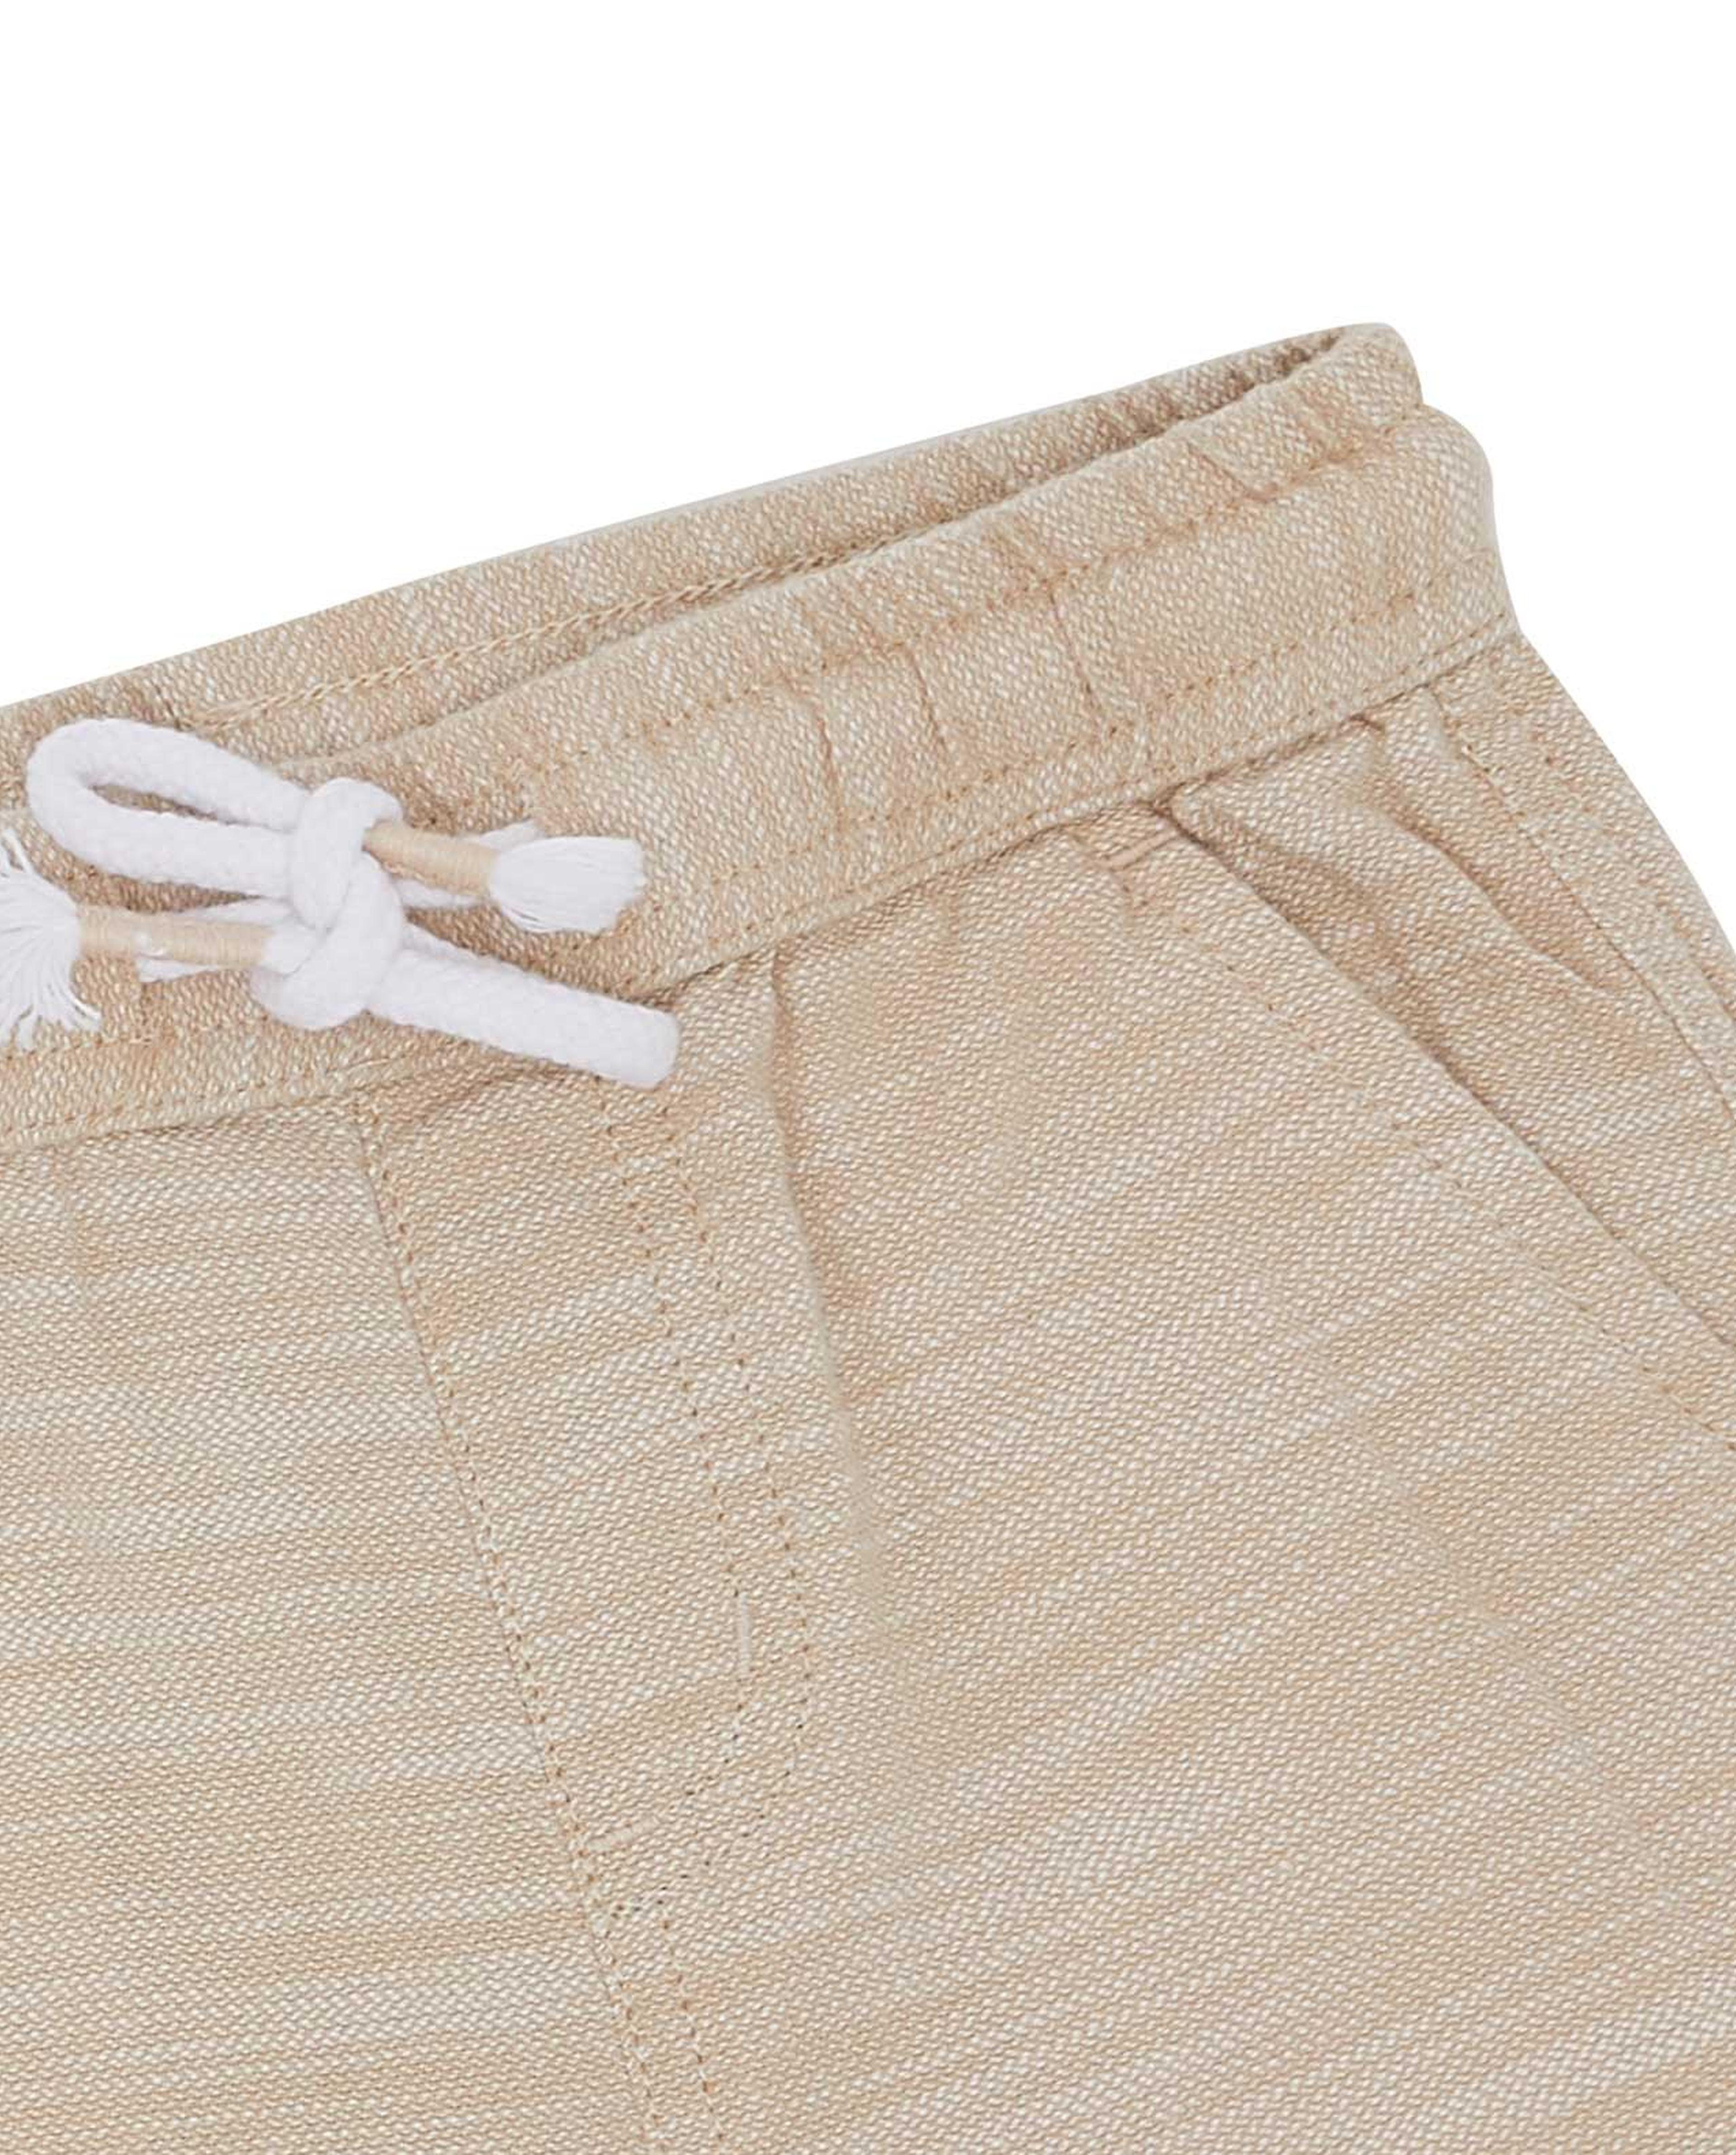 Woven Shorts with Drawstring Waist